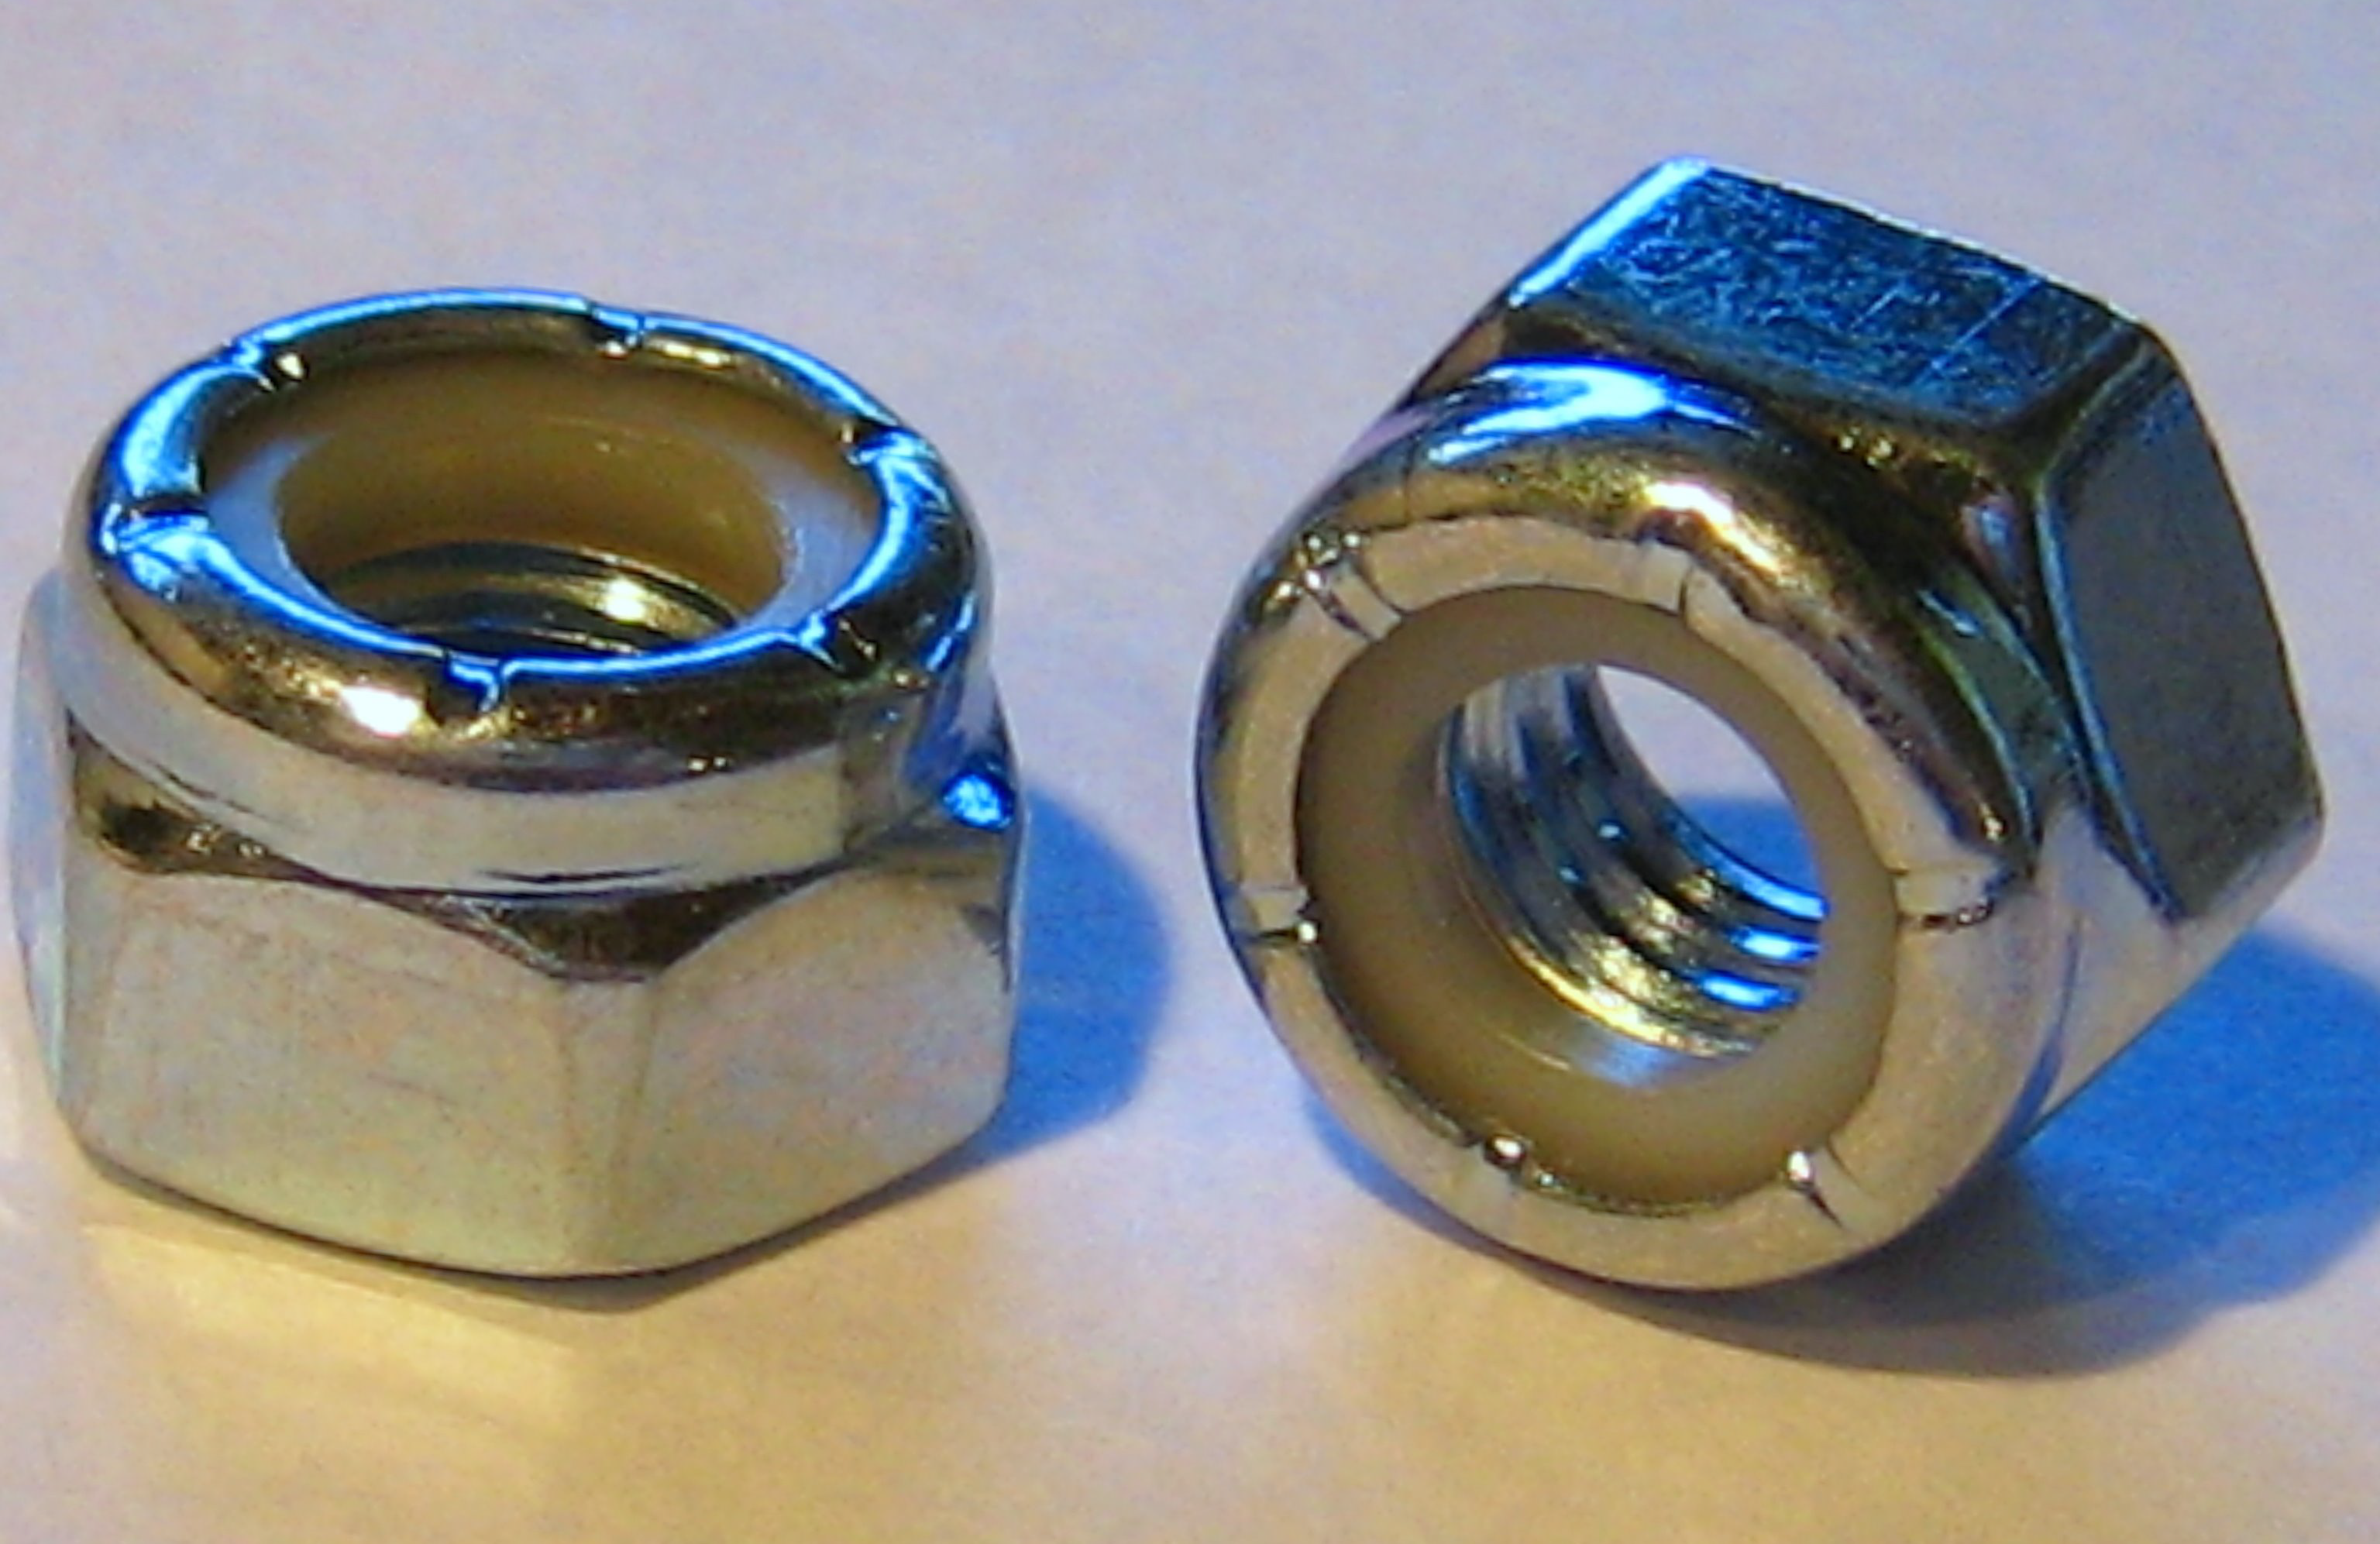 Two metal nyloc nuts, one with a blue nylon insert, side by side on a white surface.